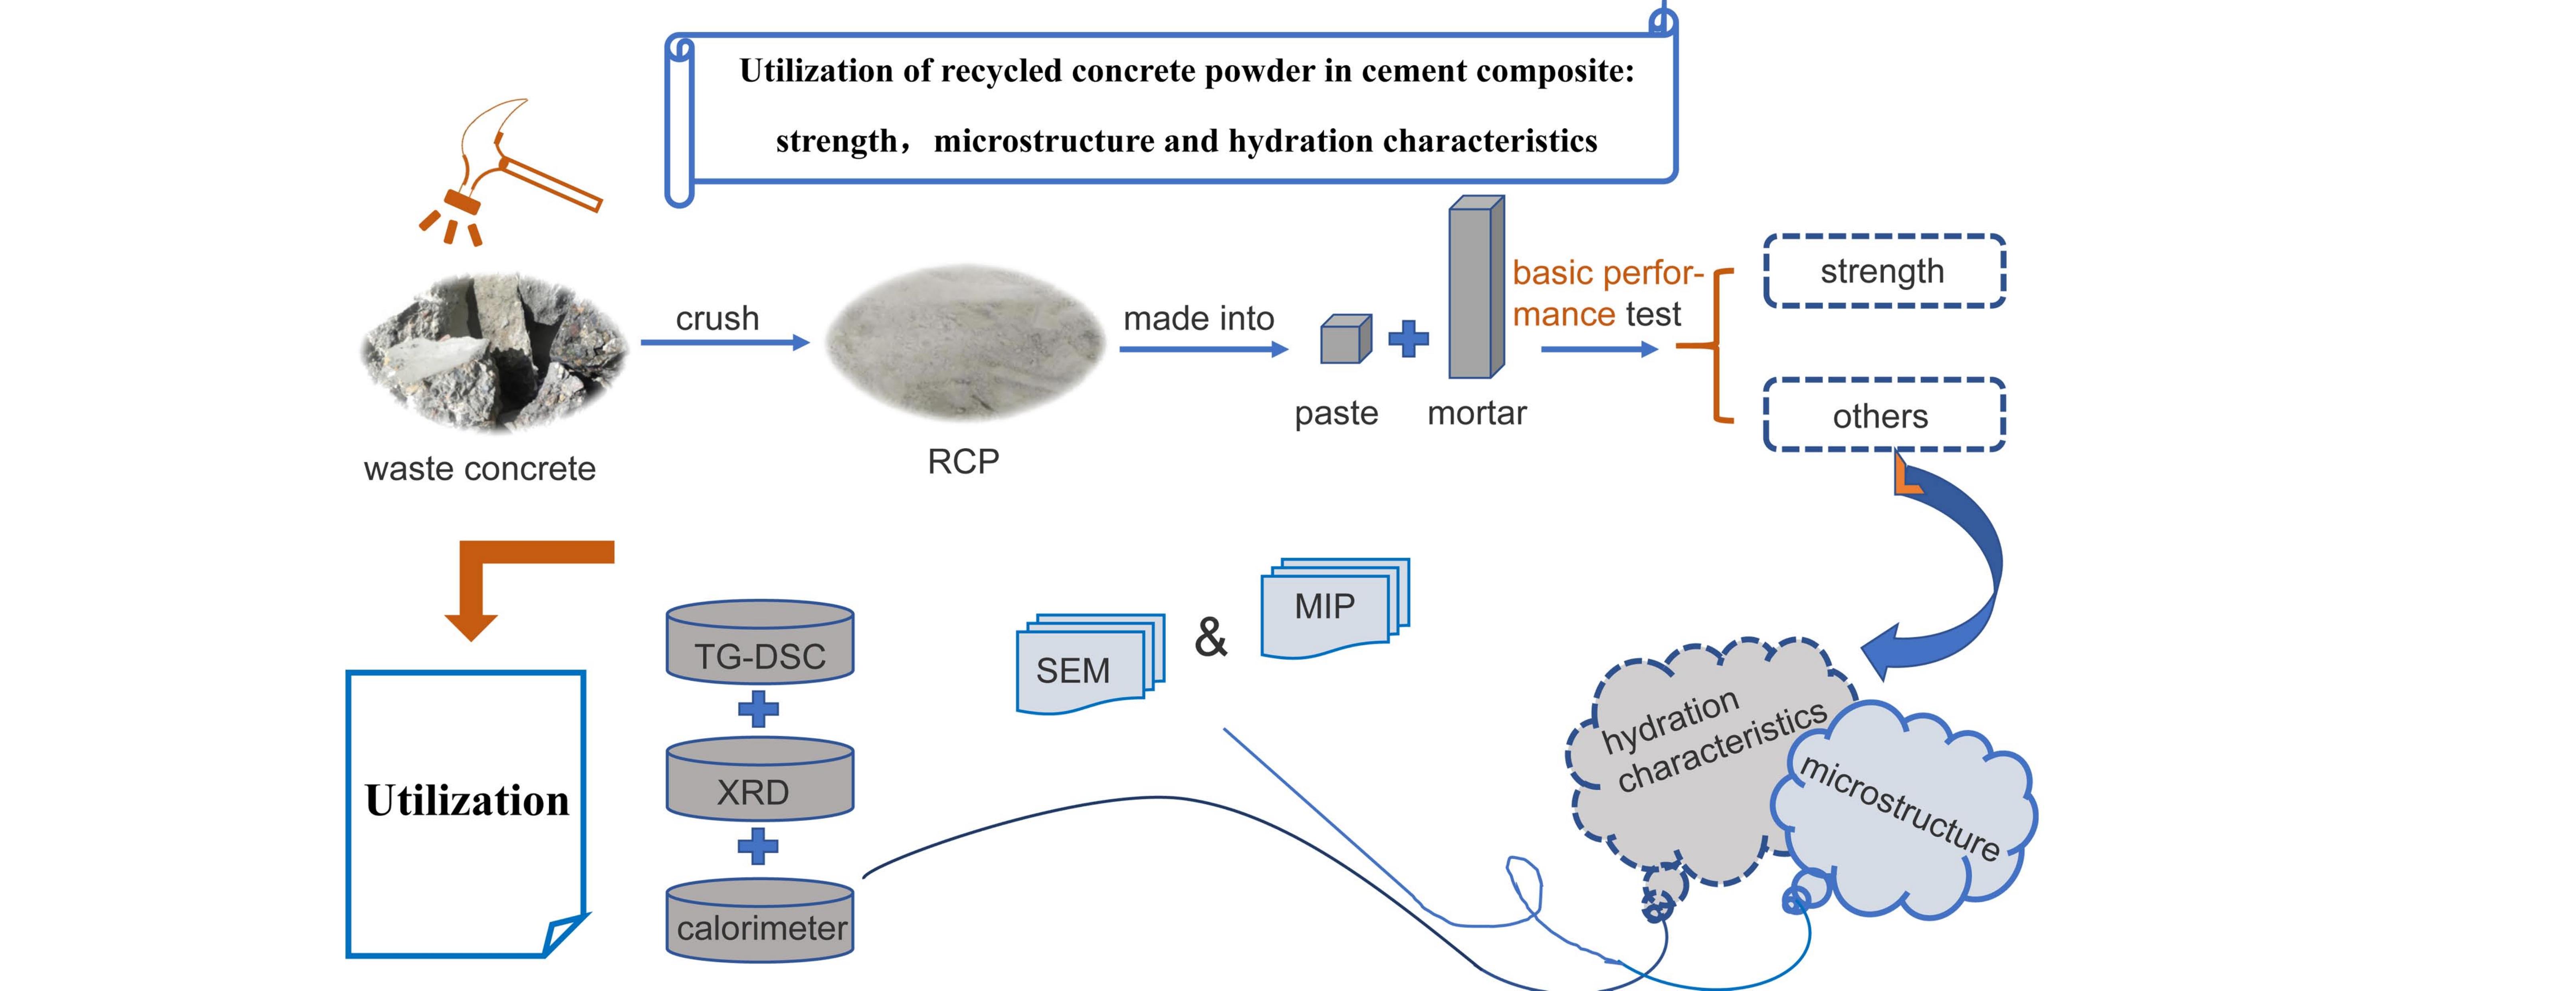 Utilization of Recycled Concrete Powder in Cement Composite: Strength, Microstructure and Hydration Characteristics